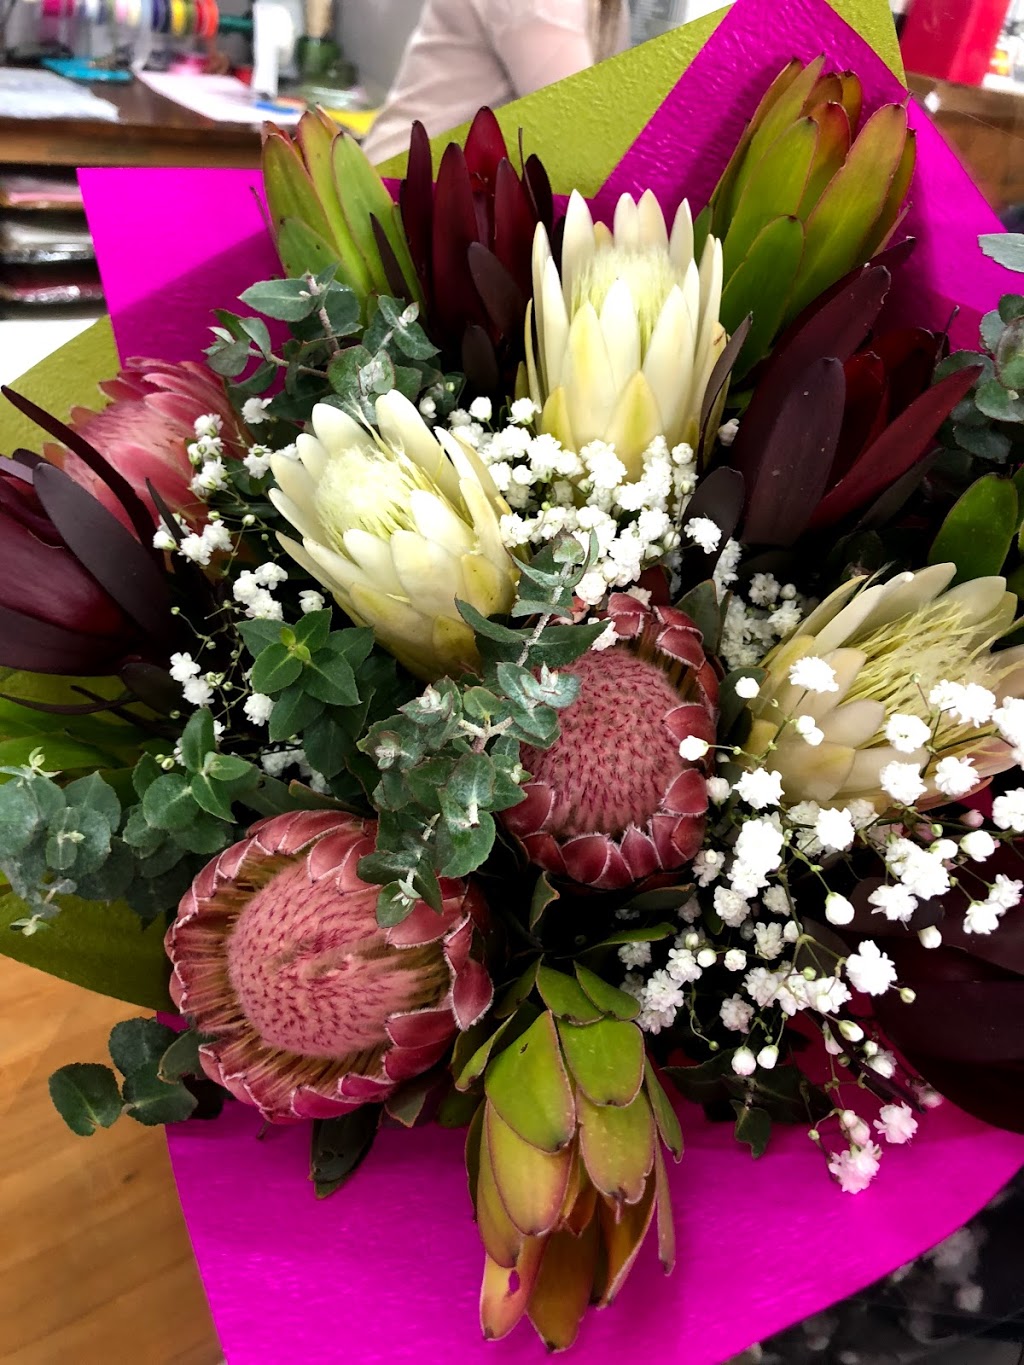 Wantirna Flowers & Gifts | 7/348 Mountain Hwy, Wantirna VIC 3152, Australia | Phone: (03) 8782 5112